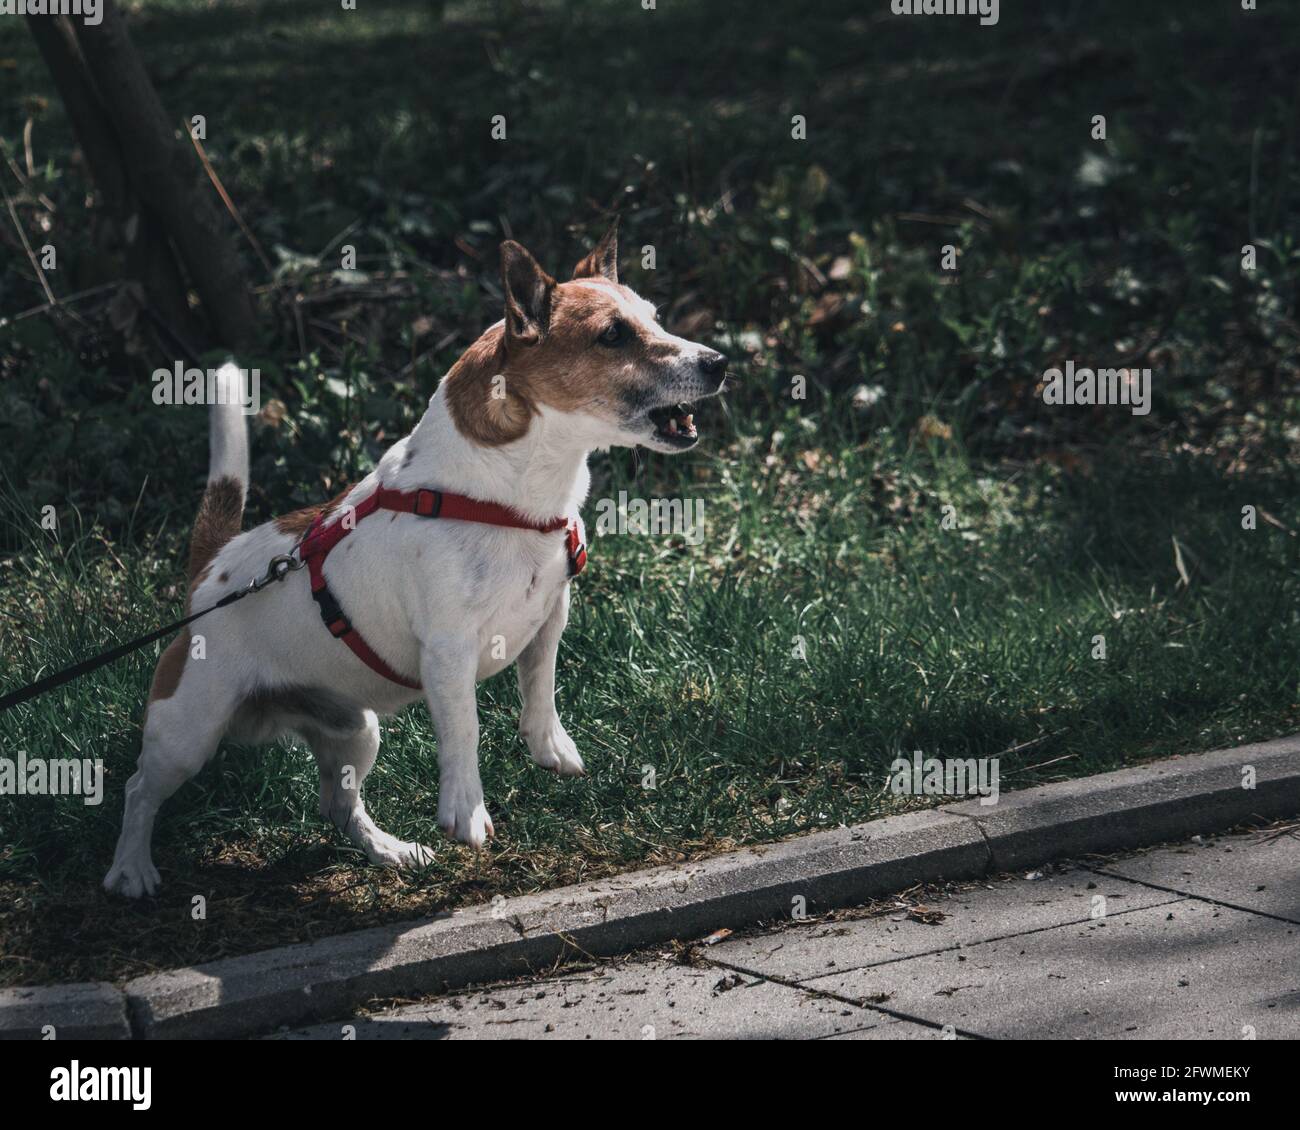 Angry dog try attack Stock Photo